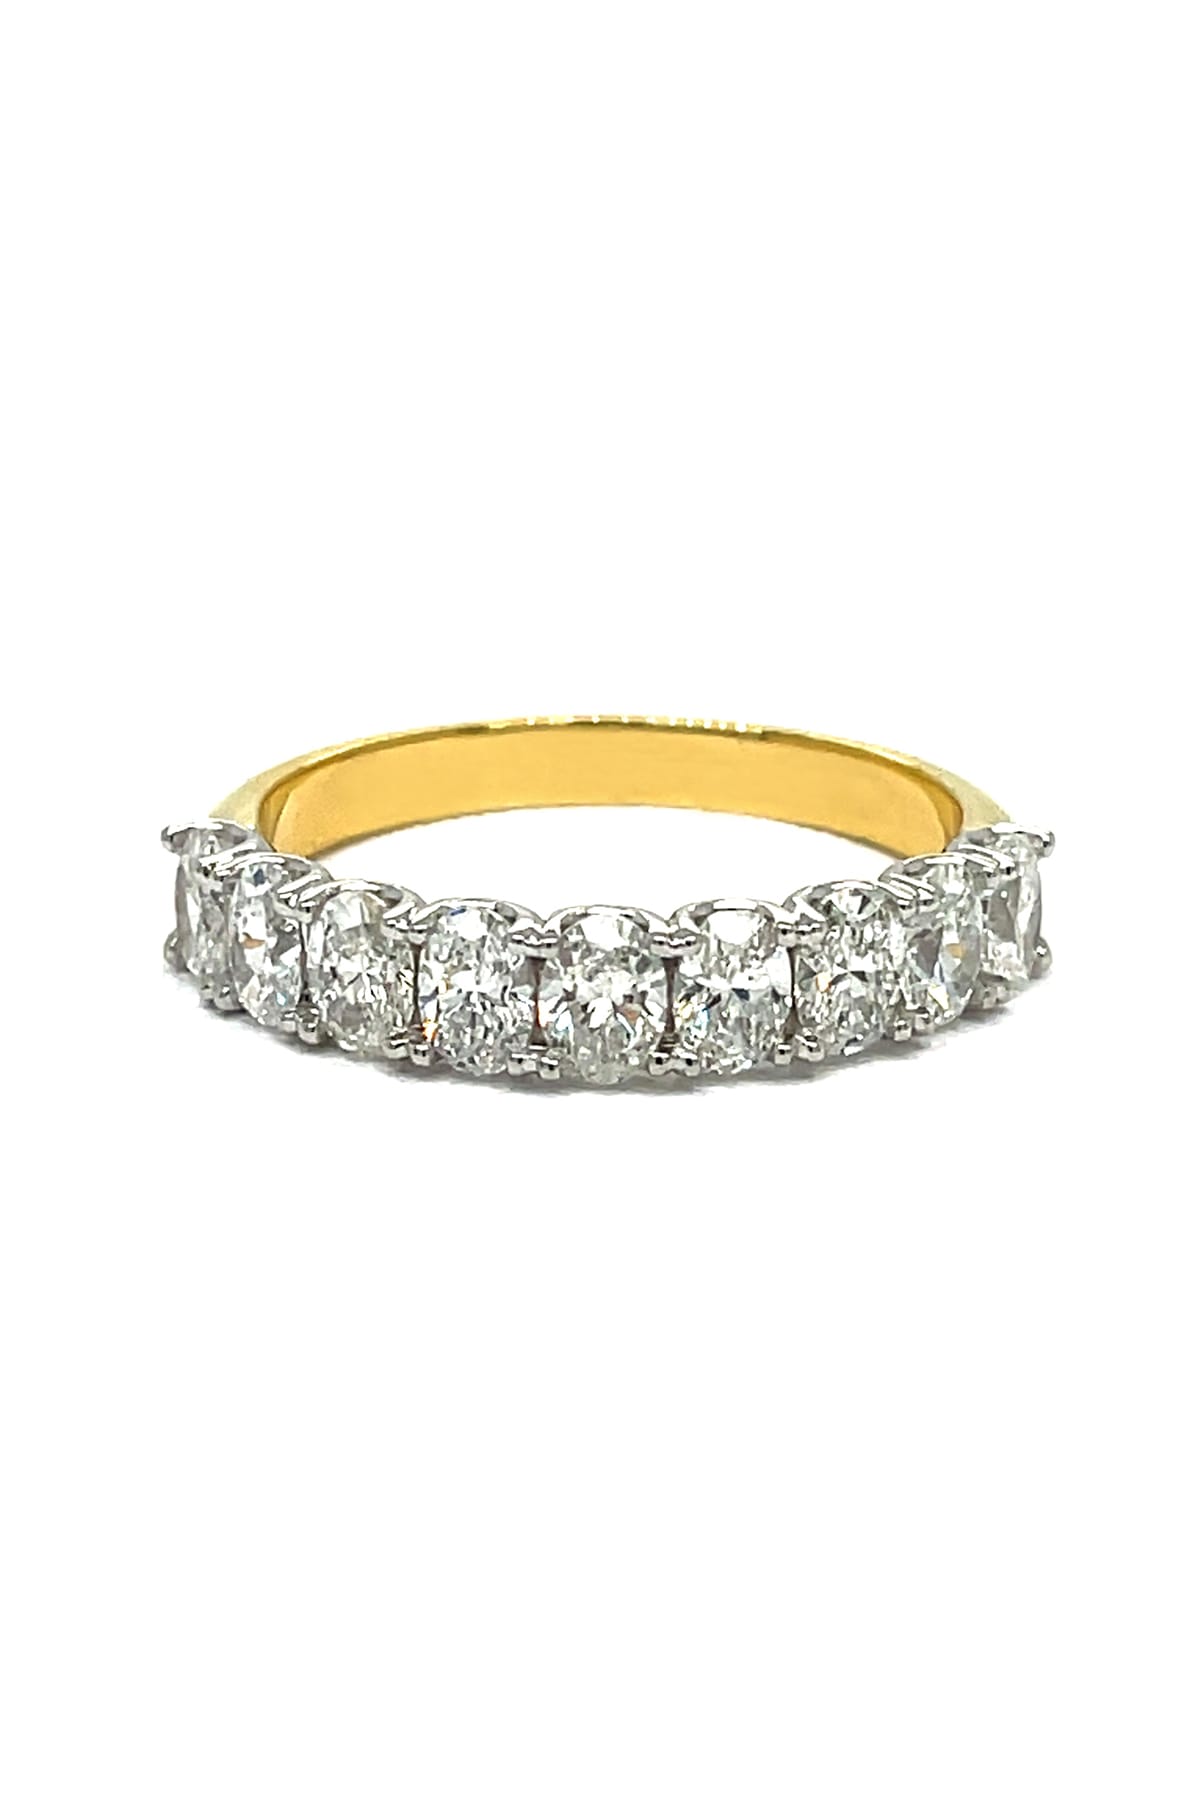 18 Carat Yellow And White Gold Diamond Ring available at LeGassick Diamonds and Jewellery Gold Coast, Australia.